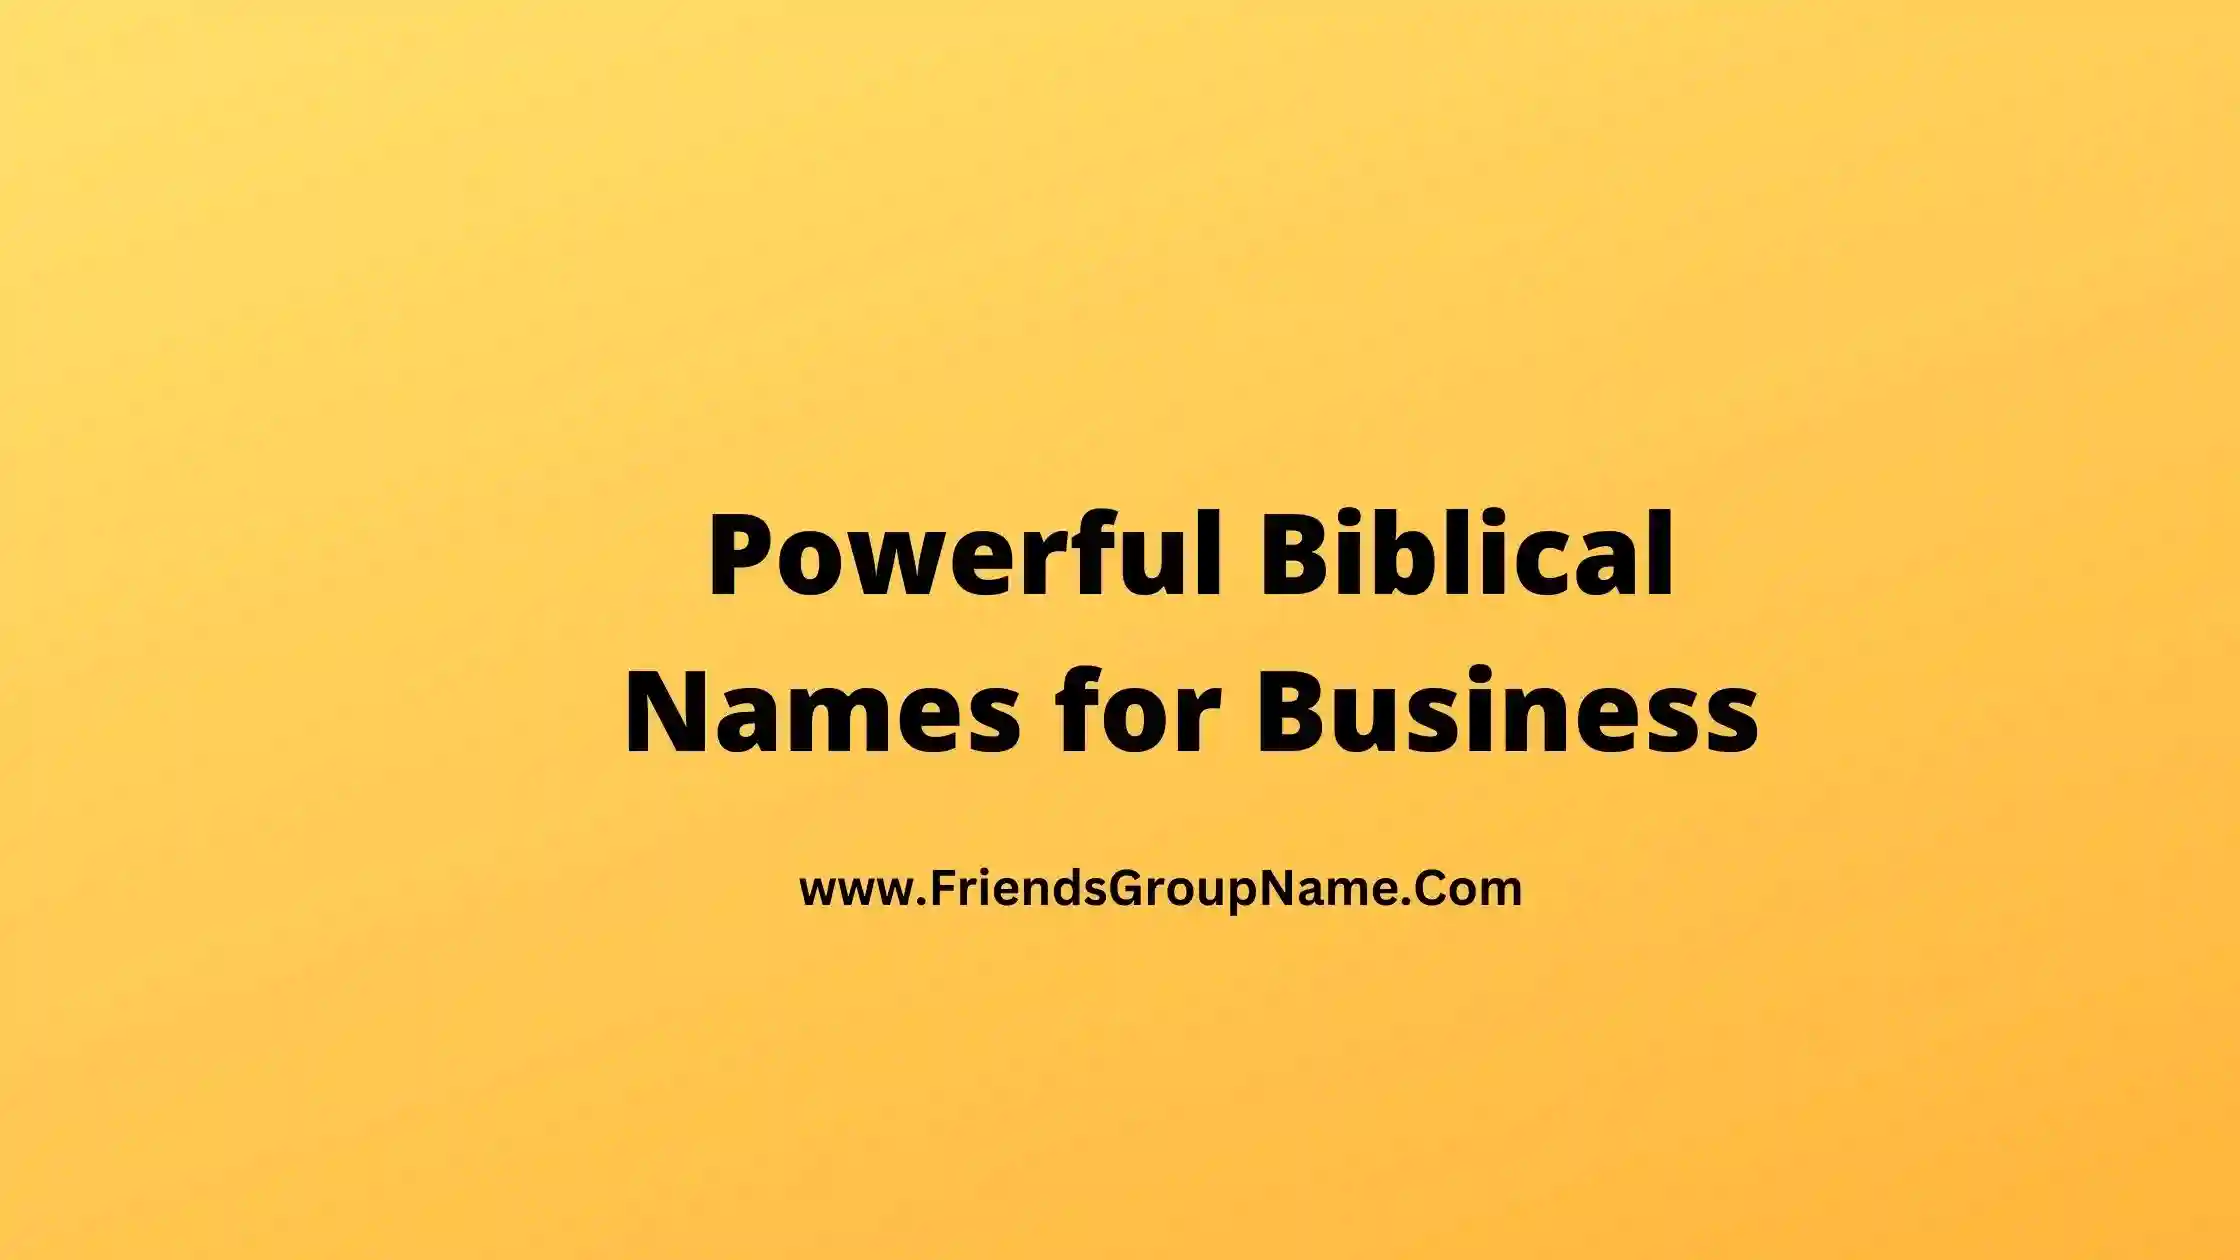 Powerful Biblical Names for Business